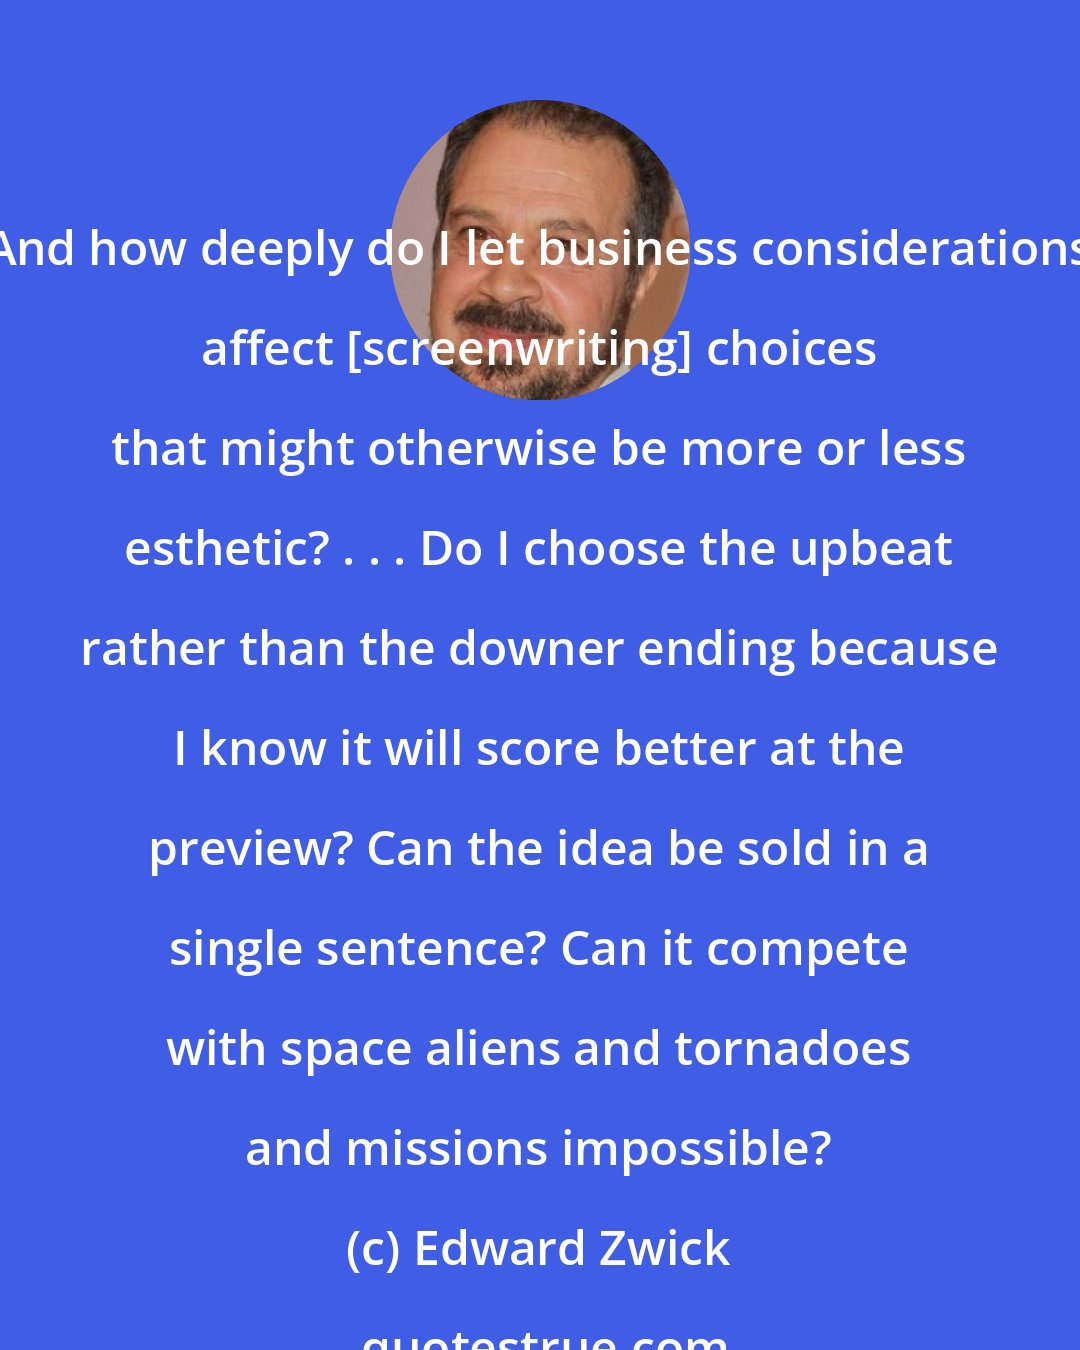 Edward Zwick: And how deeply do I let business considerations affect [screenwriting] choices that might otherwise be more or less esthetic? . . . Do I choose the upbeat rather than the downer ending because I know it will score better at the preview? Can the idea be sold in a single sentence? Can it compete with space aliens and tornadoes and missions impossible?